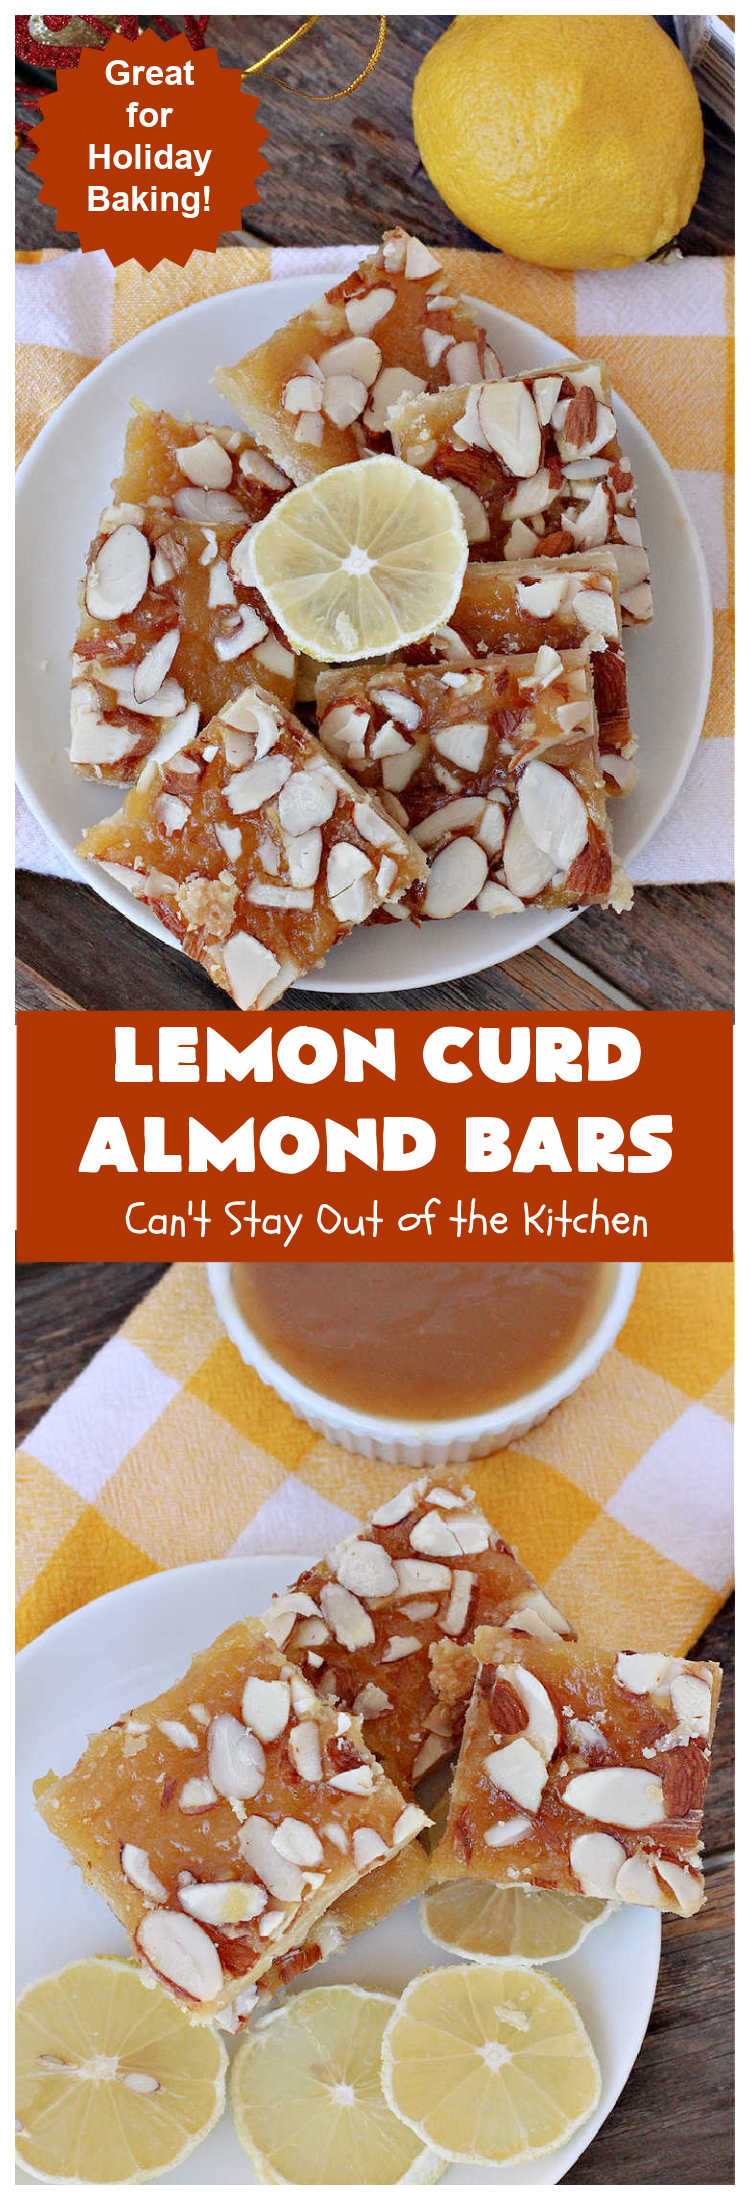 Lemon Curd Almond Bars | Can't Stay Out of the Kitchen